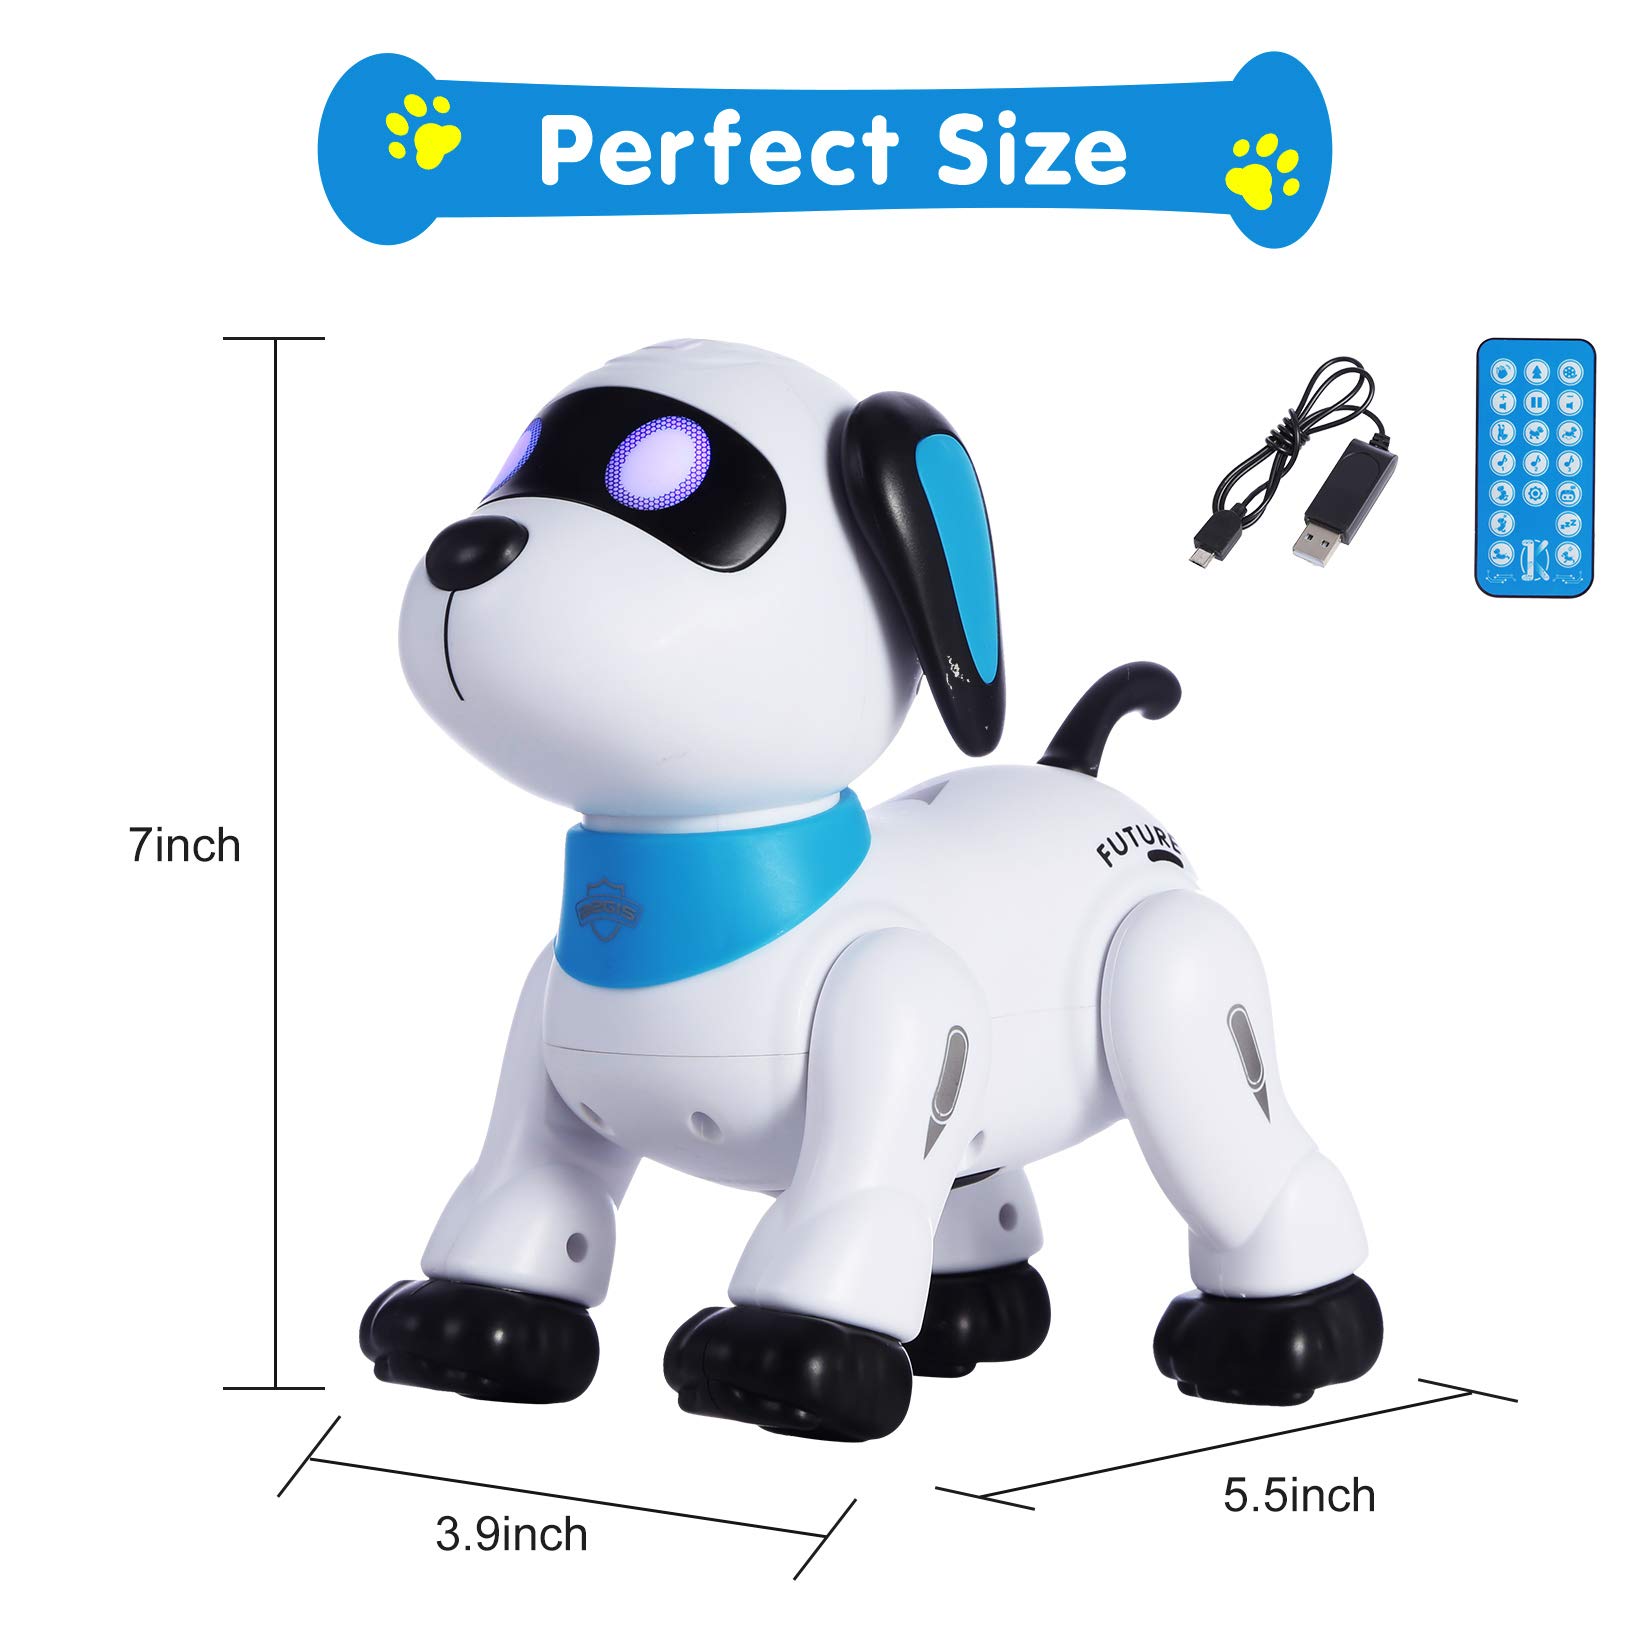 LUOYIMAN Remote Control Robot Dog Toy, Programmable Interactive & Smart Dancing Robots for Kids 5 and up, RC Stunt Toy Dog with Sound LED Eyes, Electronic Pets Toys Robotic Dogs for Kids Gifts Blue